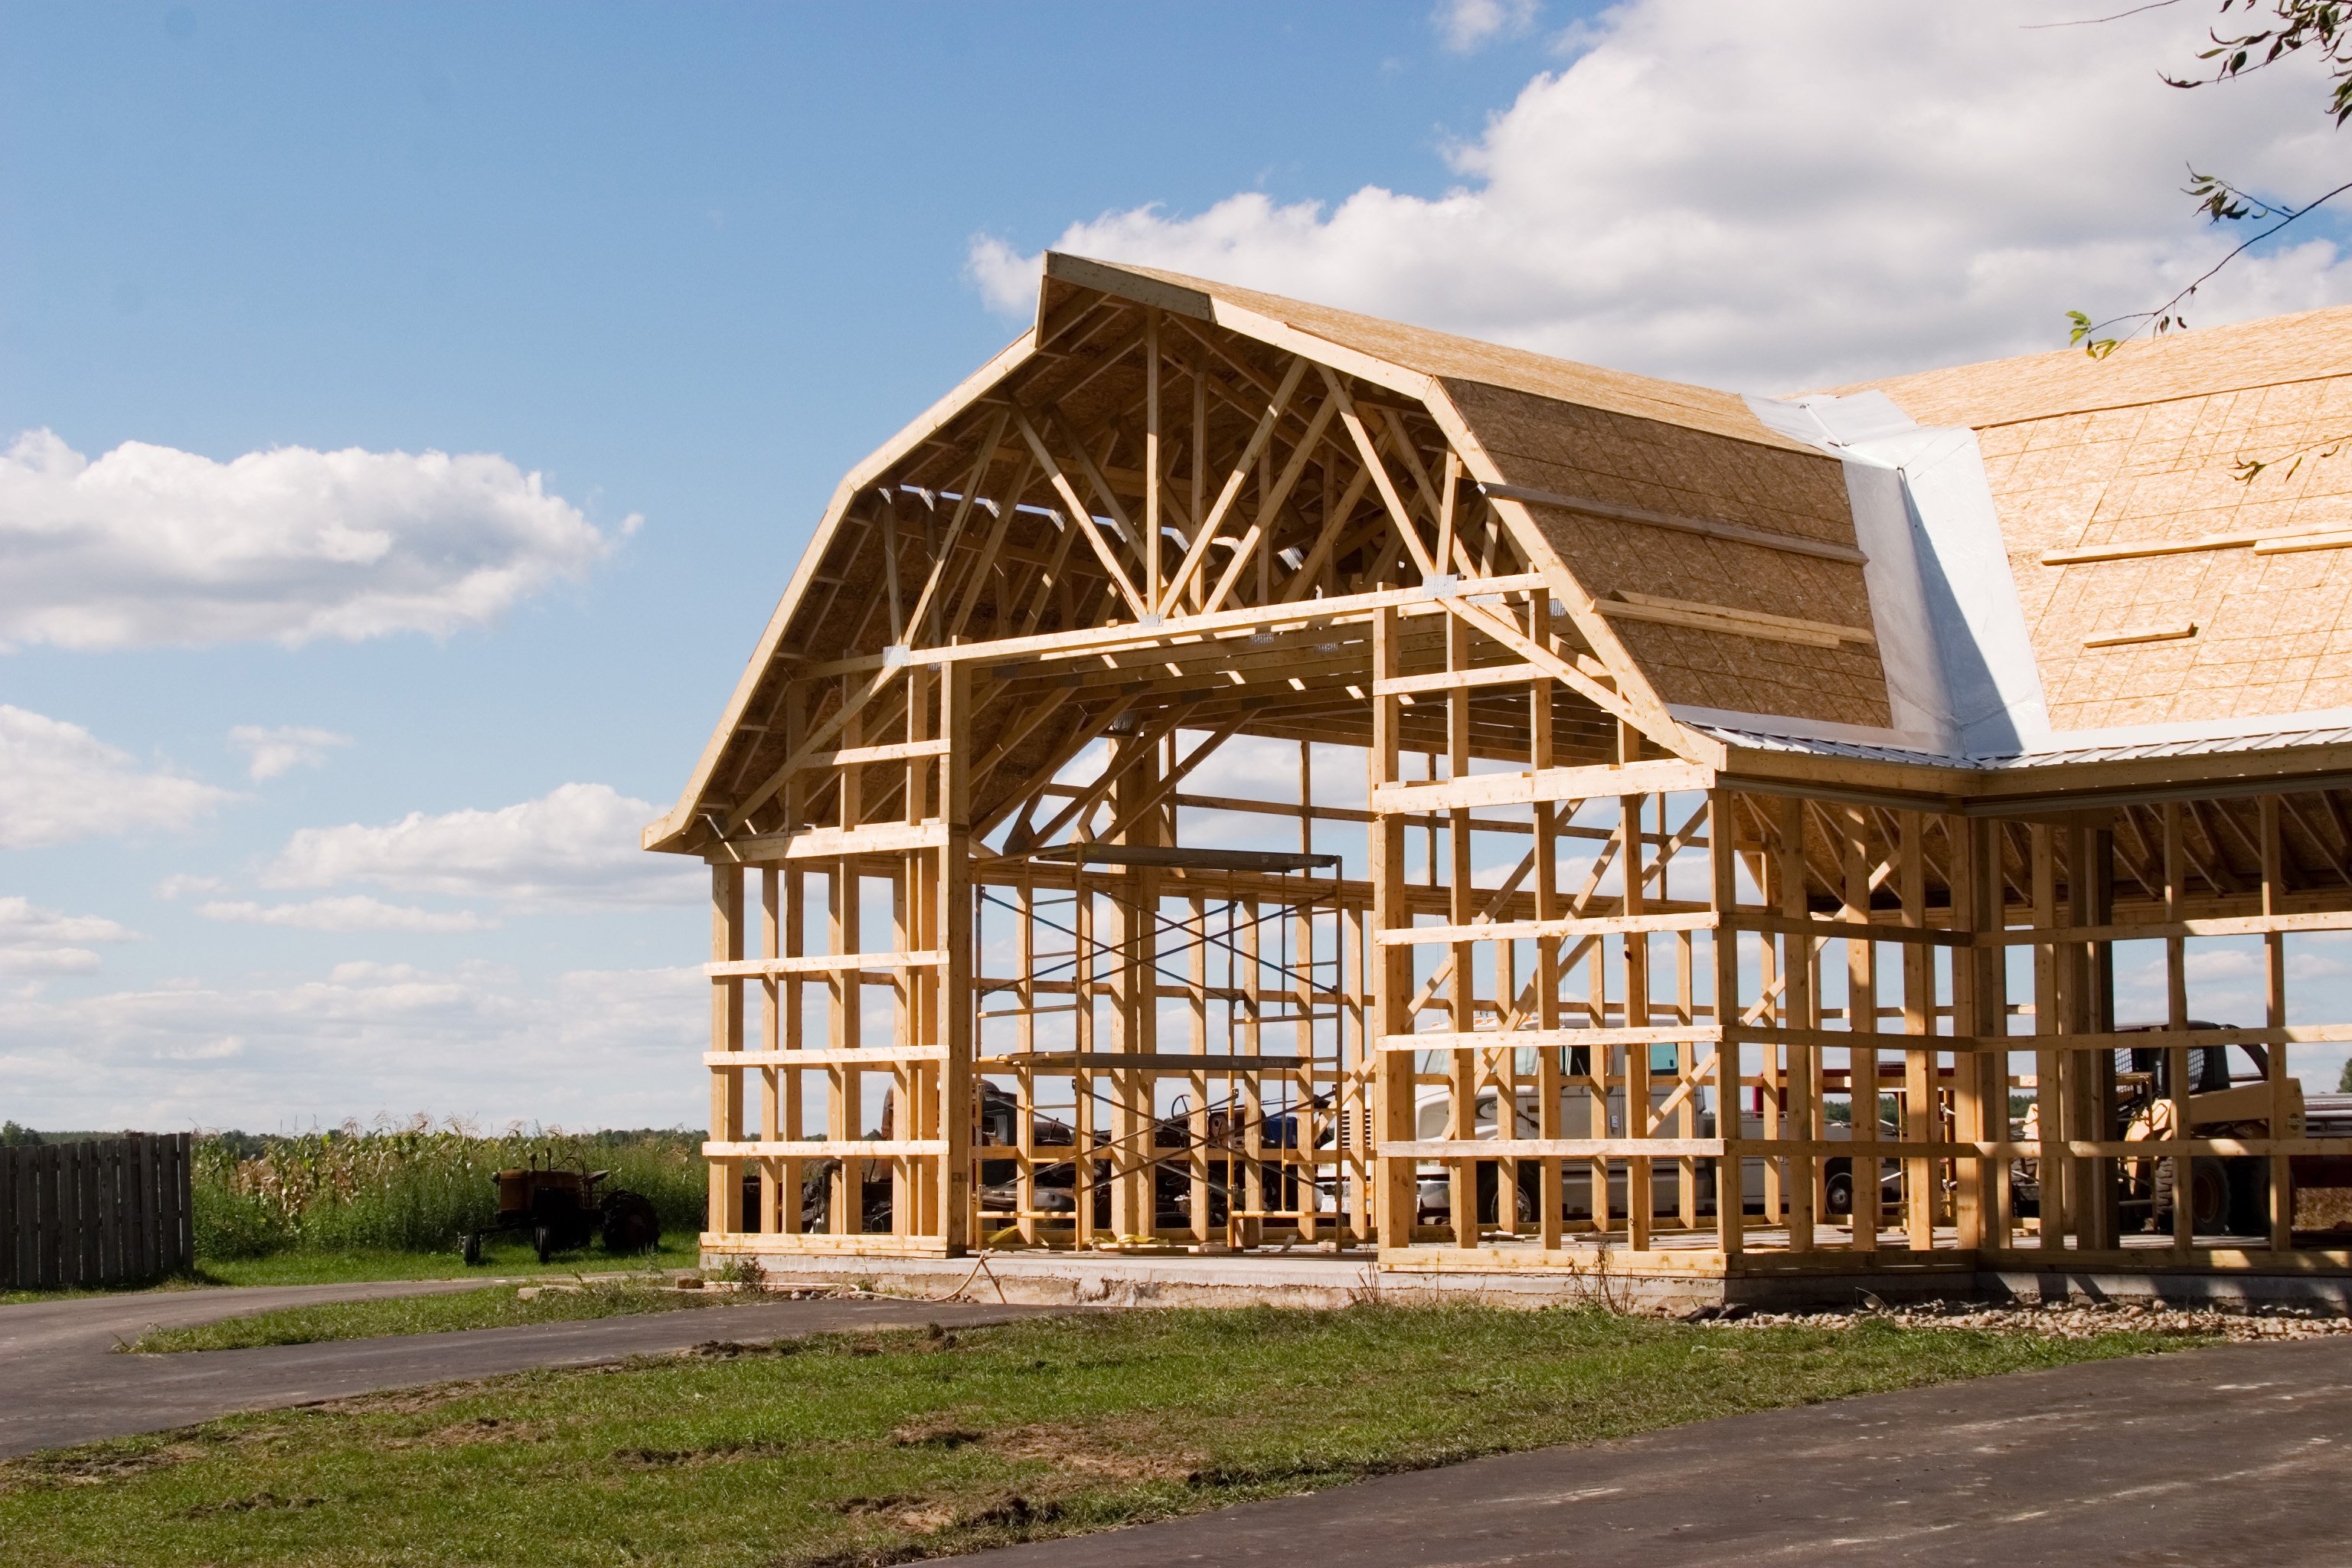 So You Want To Build A Barn? Read This Planning Guide First